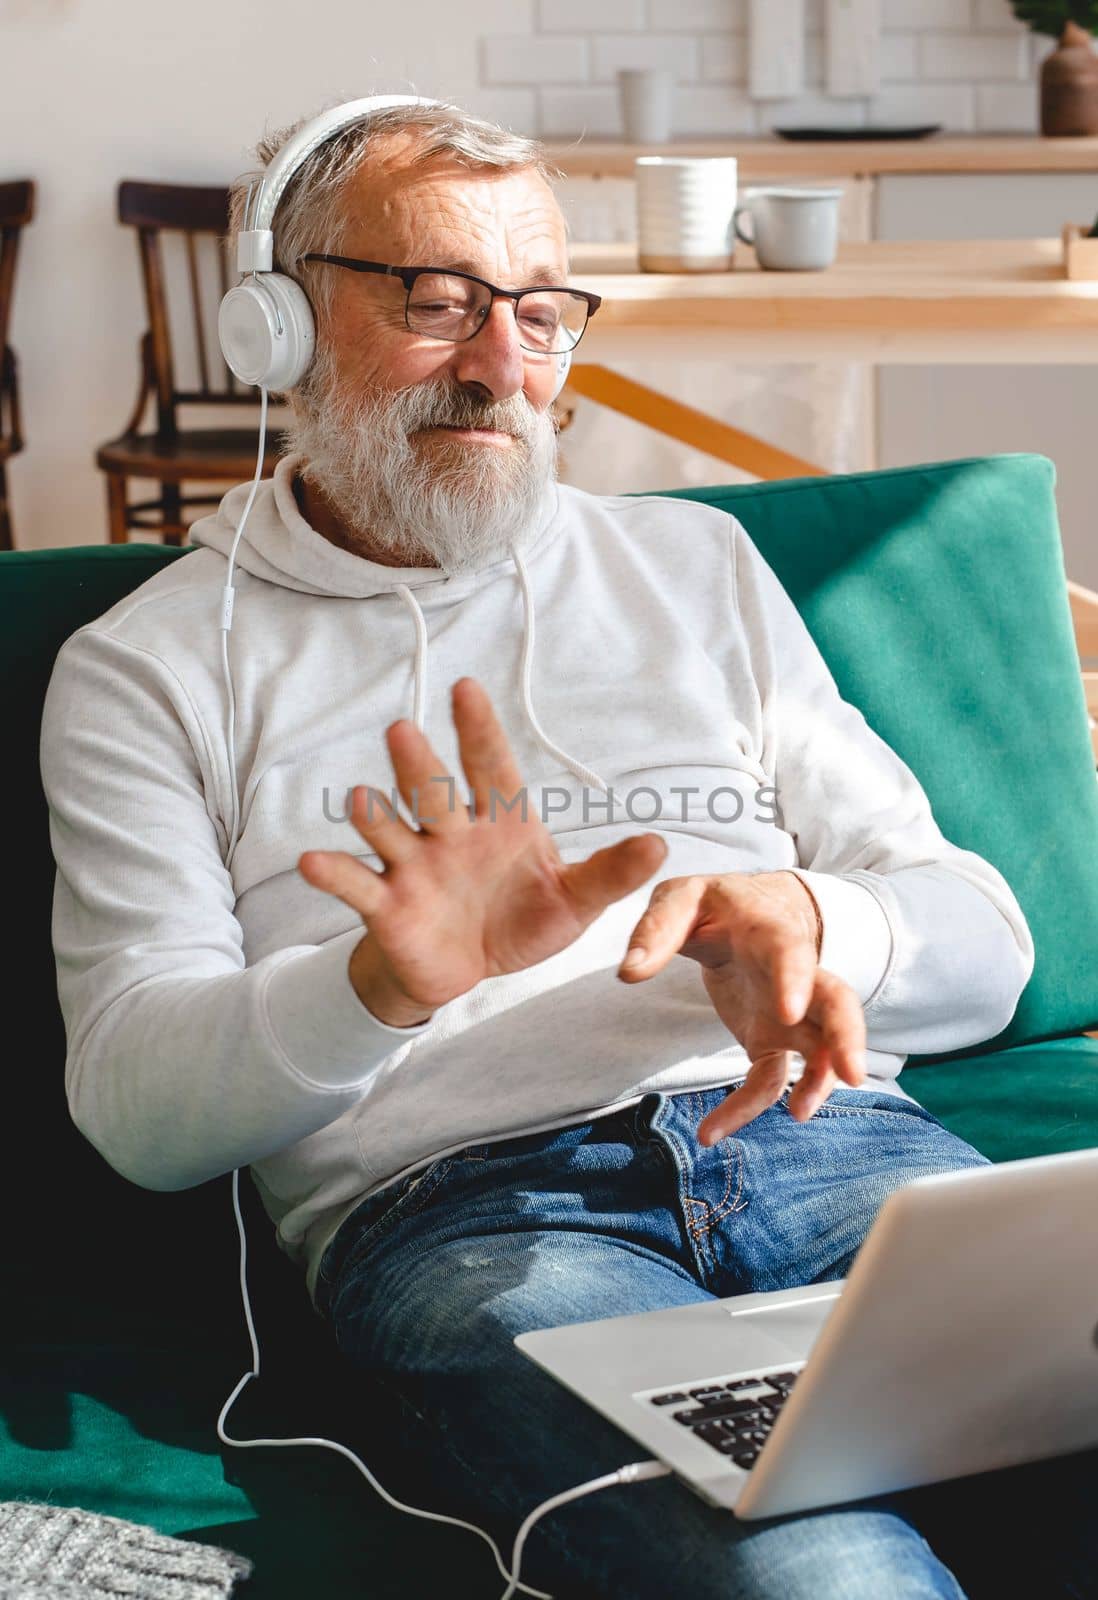 Elderly man making video call on laptop in room waving to screen and chatting with children - modern technologies communication and internet by Satura86